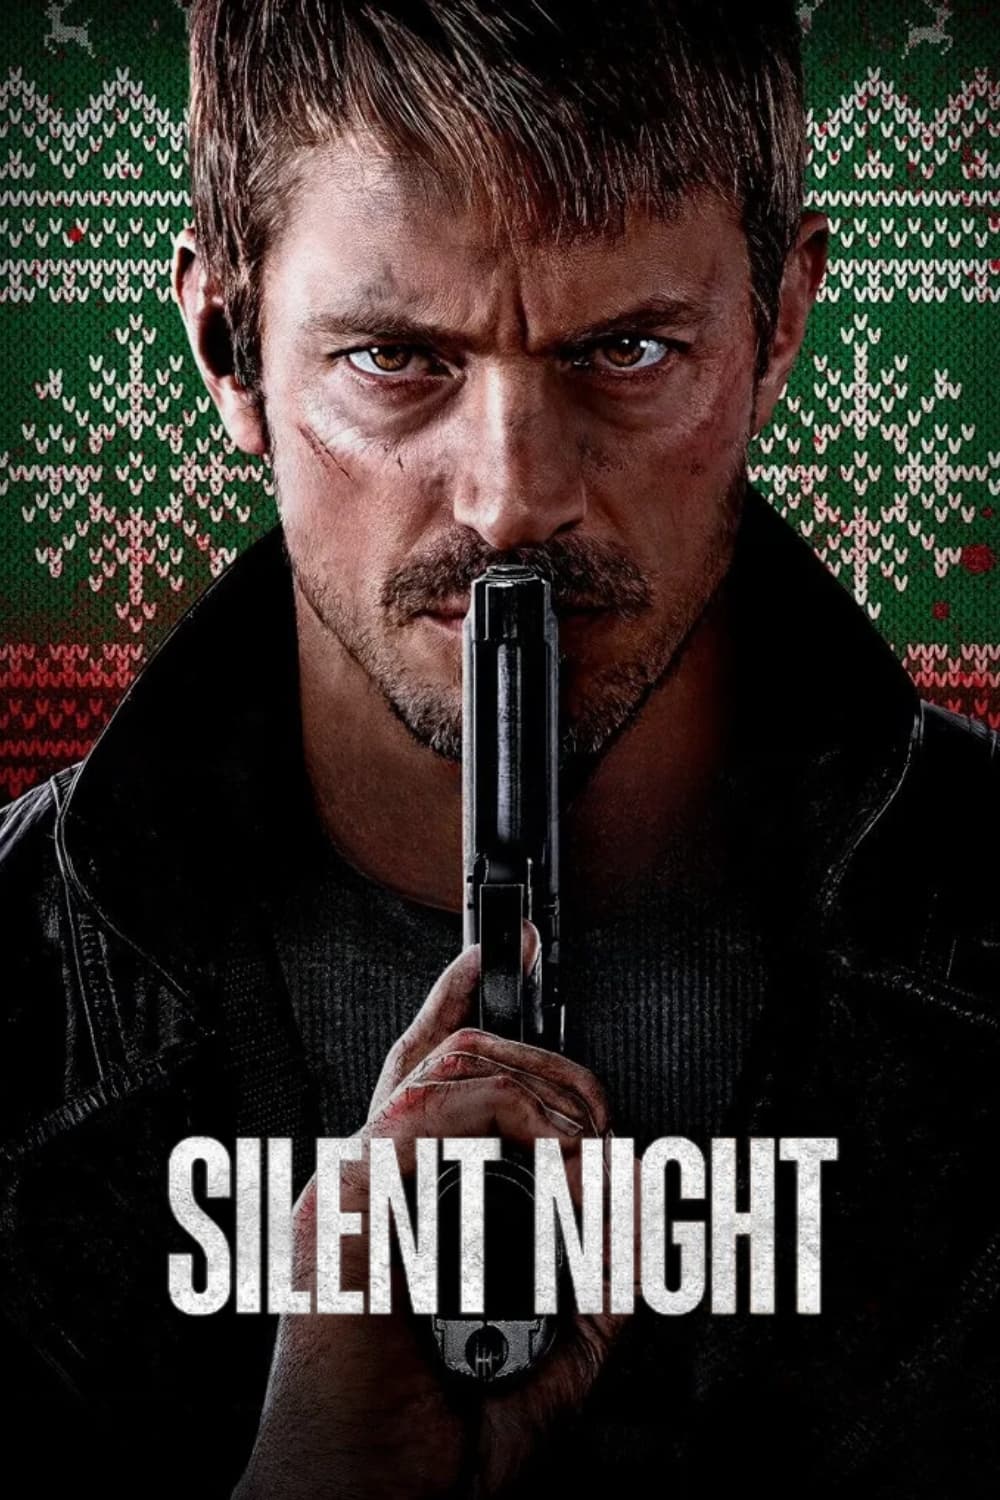 Poster for the movie "Silent Night"